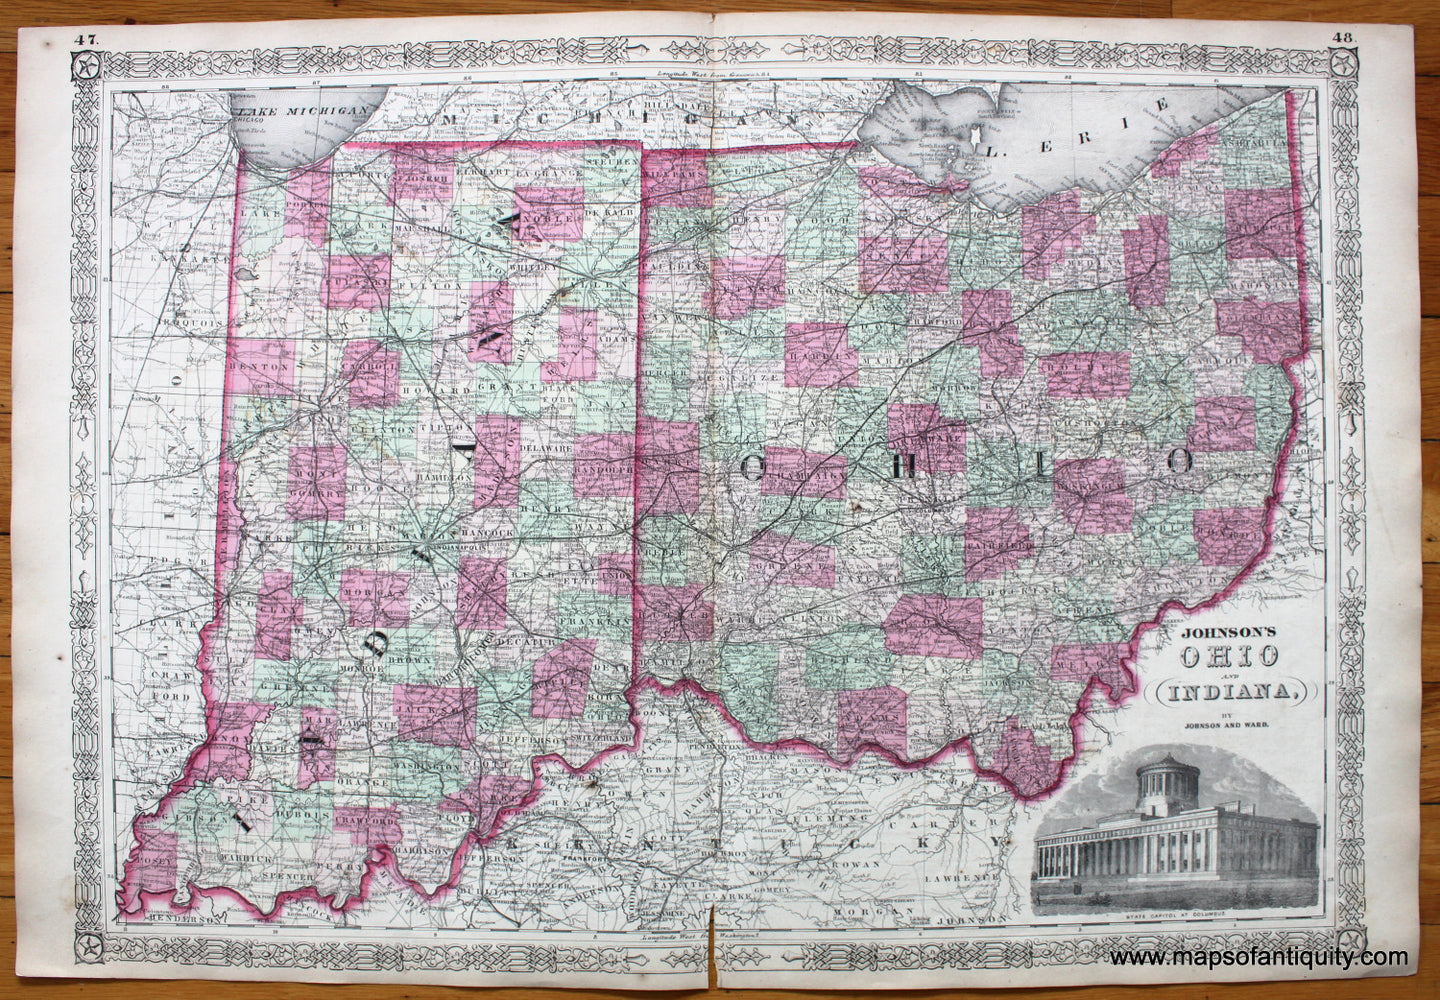 Antique-Hand-Colored-Map-Johnson's-Ohio-and-Indiana-United-States-Midwest-1864-Johnson-and-Ward-Maps-Of-Antiquity